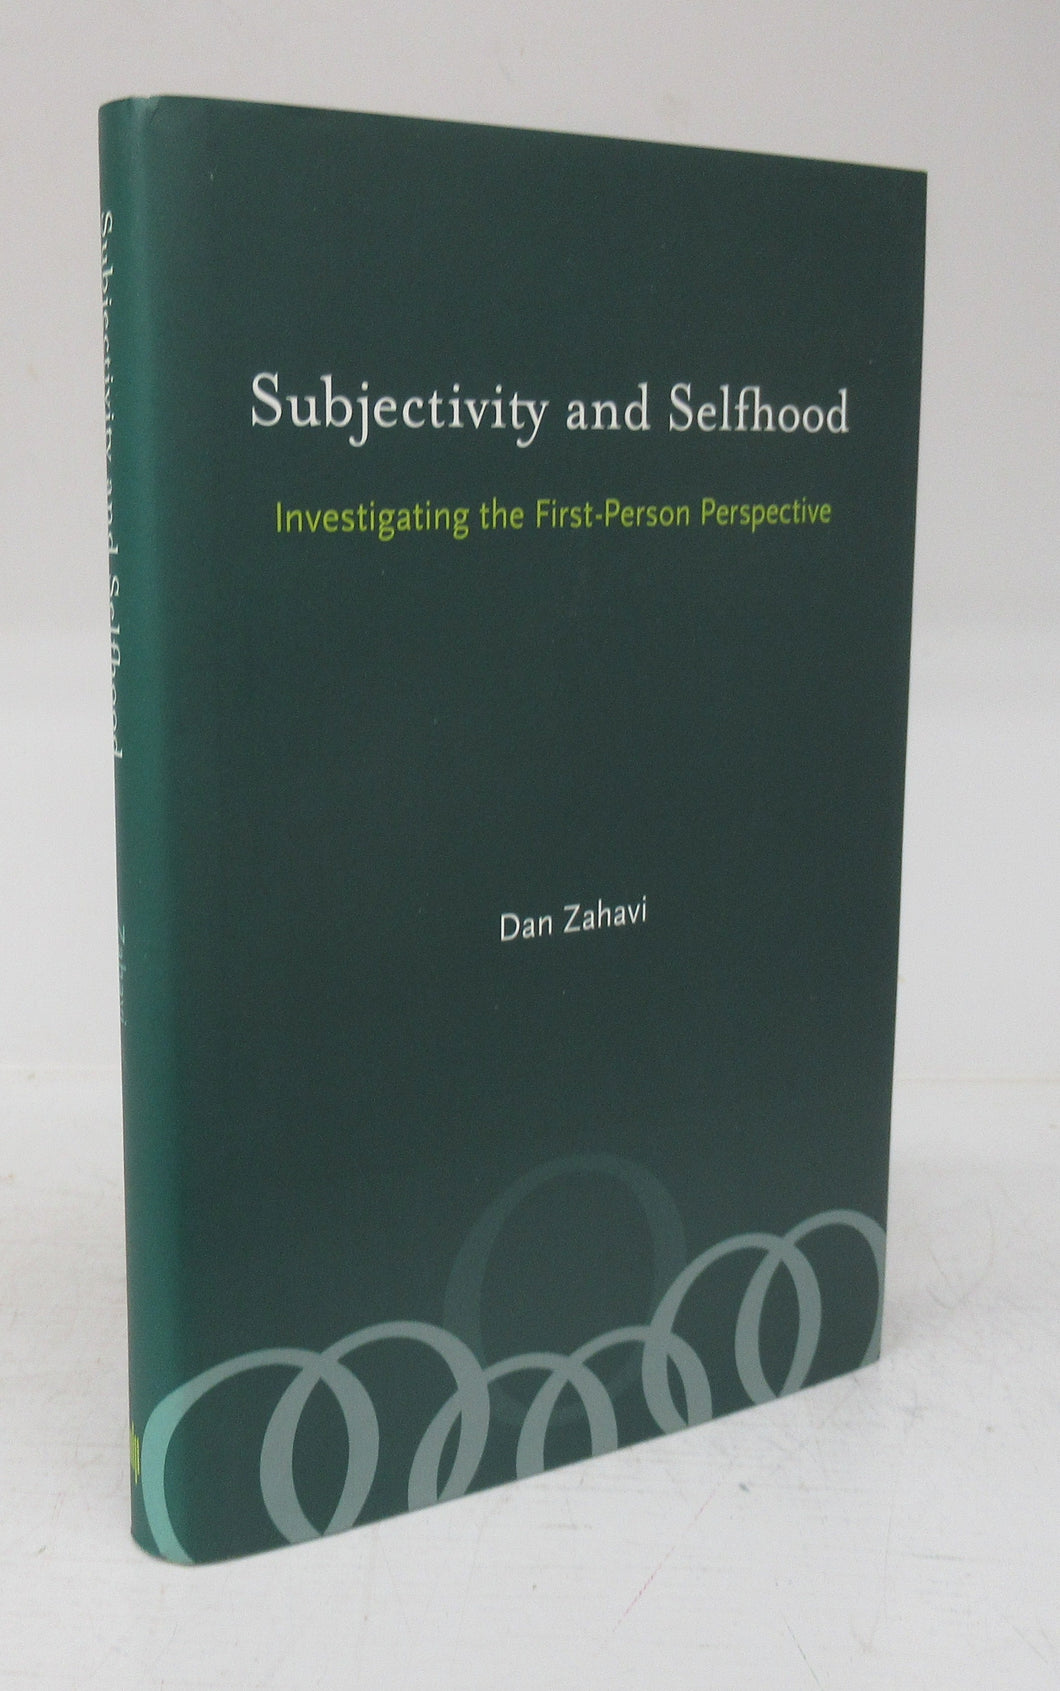 Subjectivity and Selfhood: Investigating the First-Person Perspective